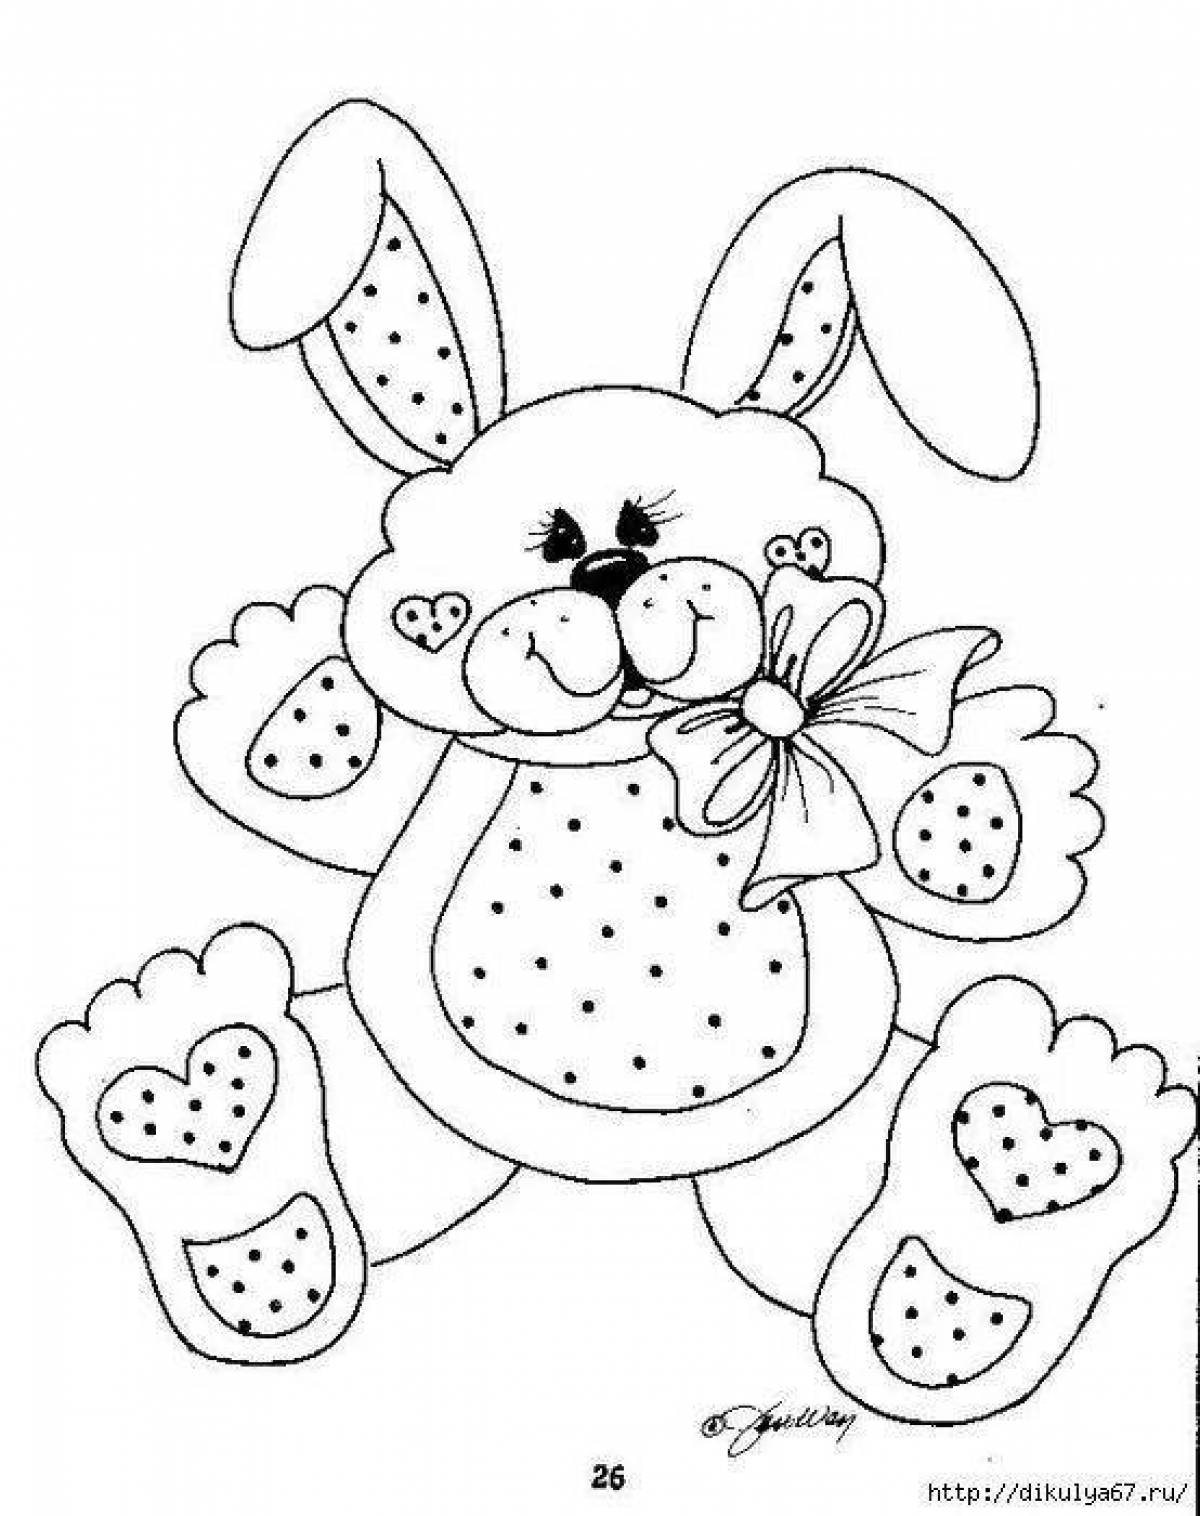 Shiny Bunny coloring page